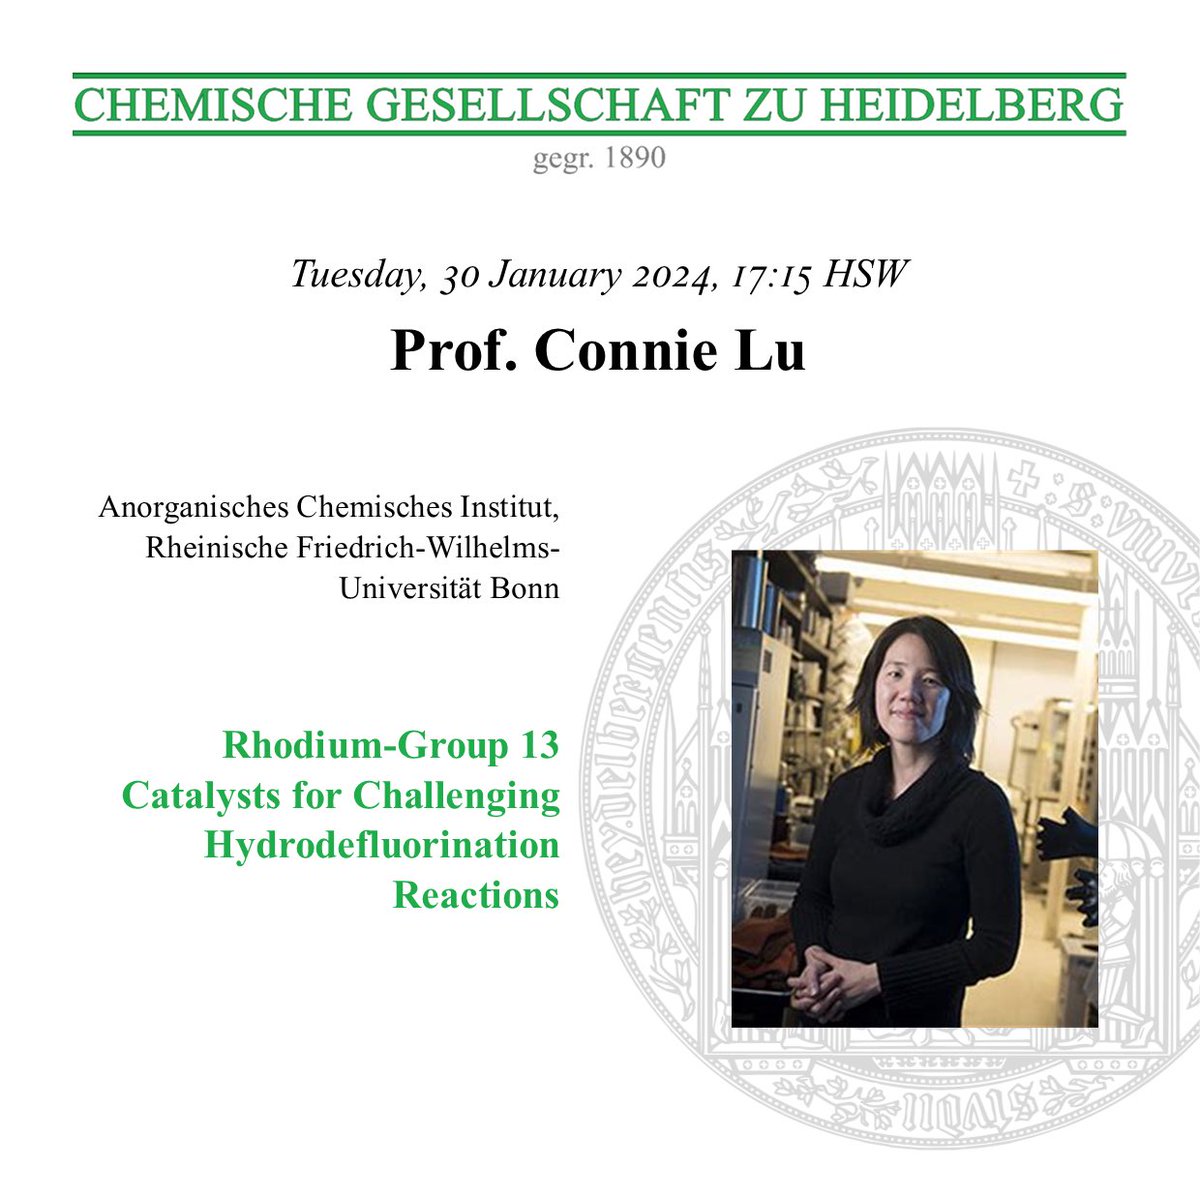 On Tuesday January 30 2024 at 17:15, Prof. Connie Lu (Rheinische Friedrich-Wilhelms-Universität Bonn) will give a lecture titled 'Rhodium-Group 13 Catalysts for Challenging Hydrodefluorination Reactions' in Hörsaal West, INF 252